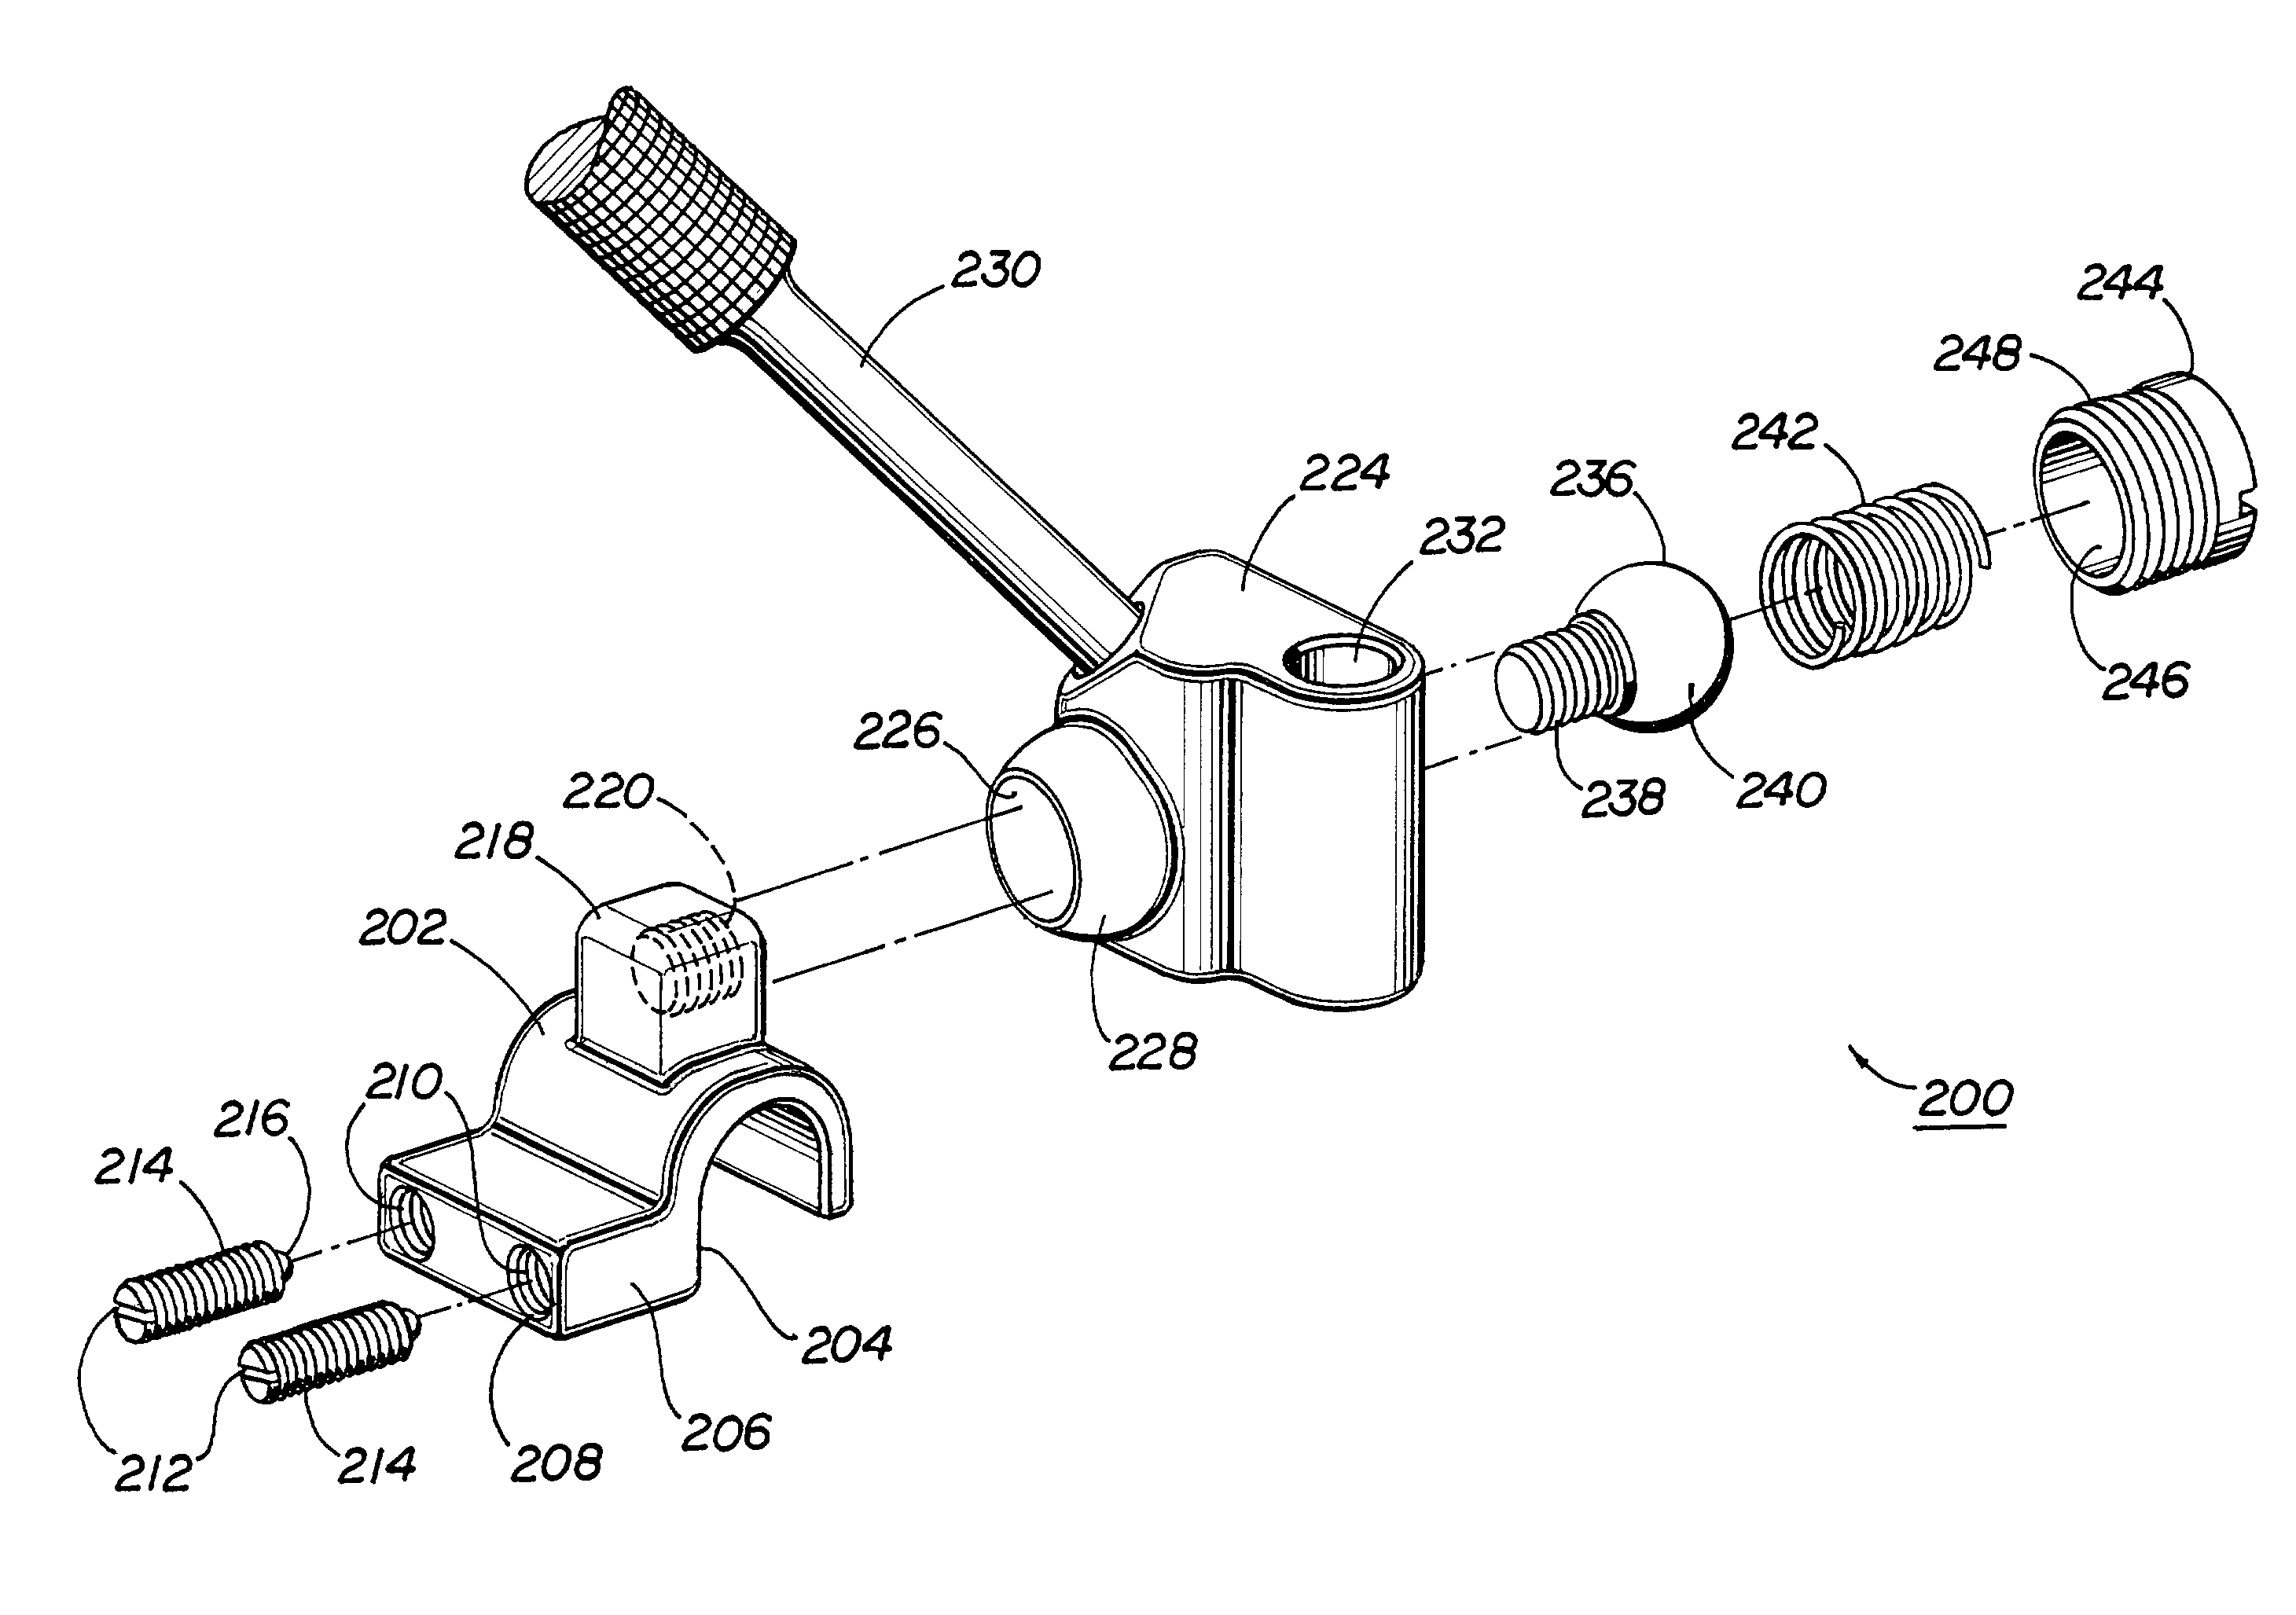 Devices, systems, and methods for placing and positioning fixation elements in external fixation systems